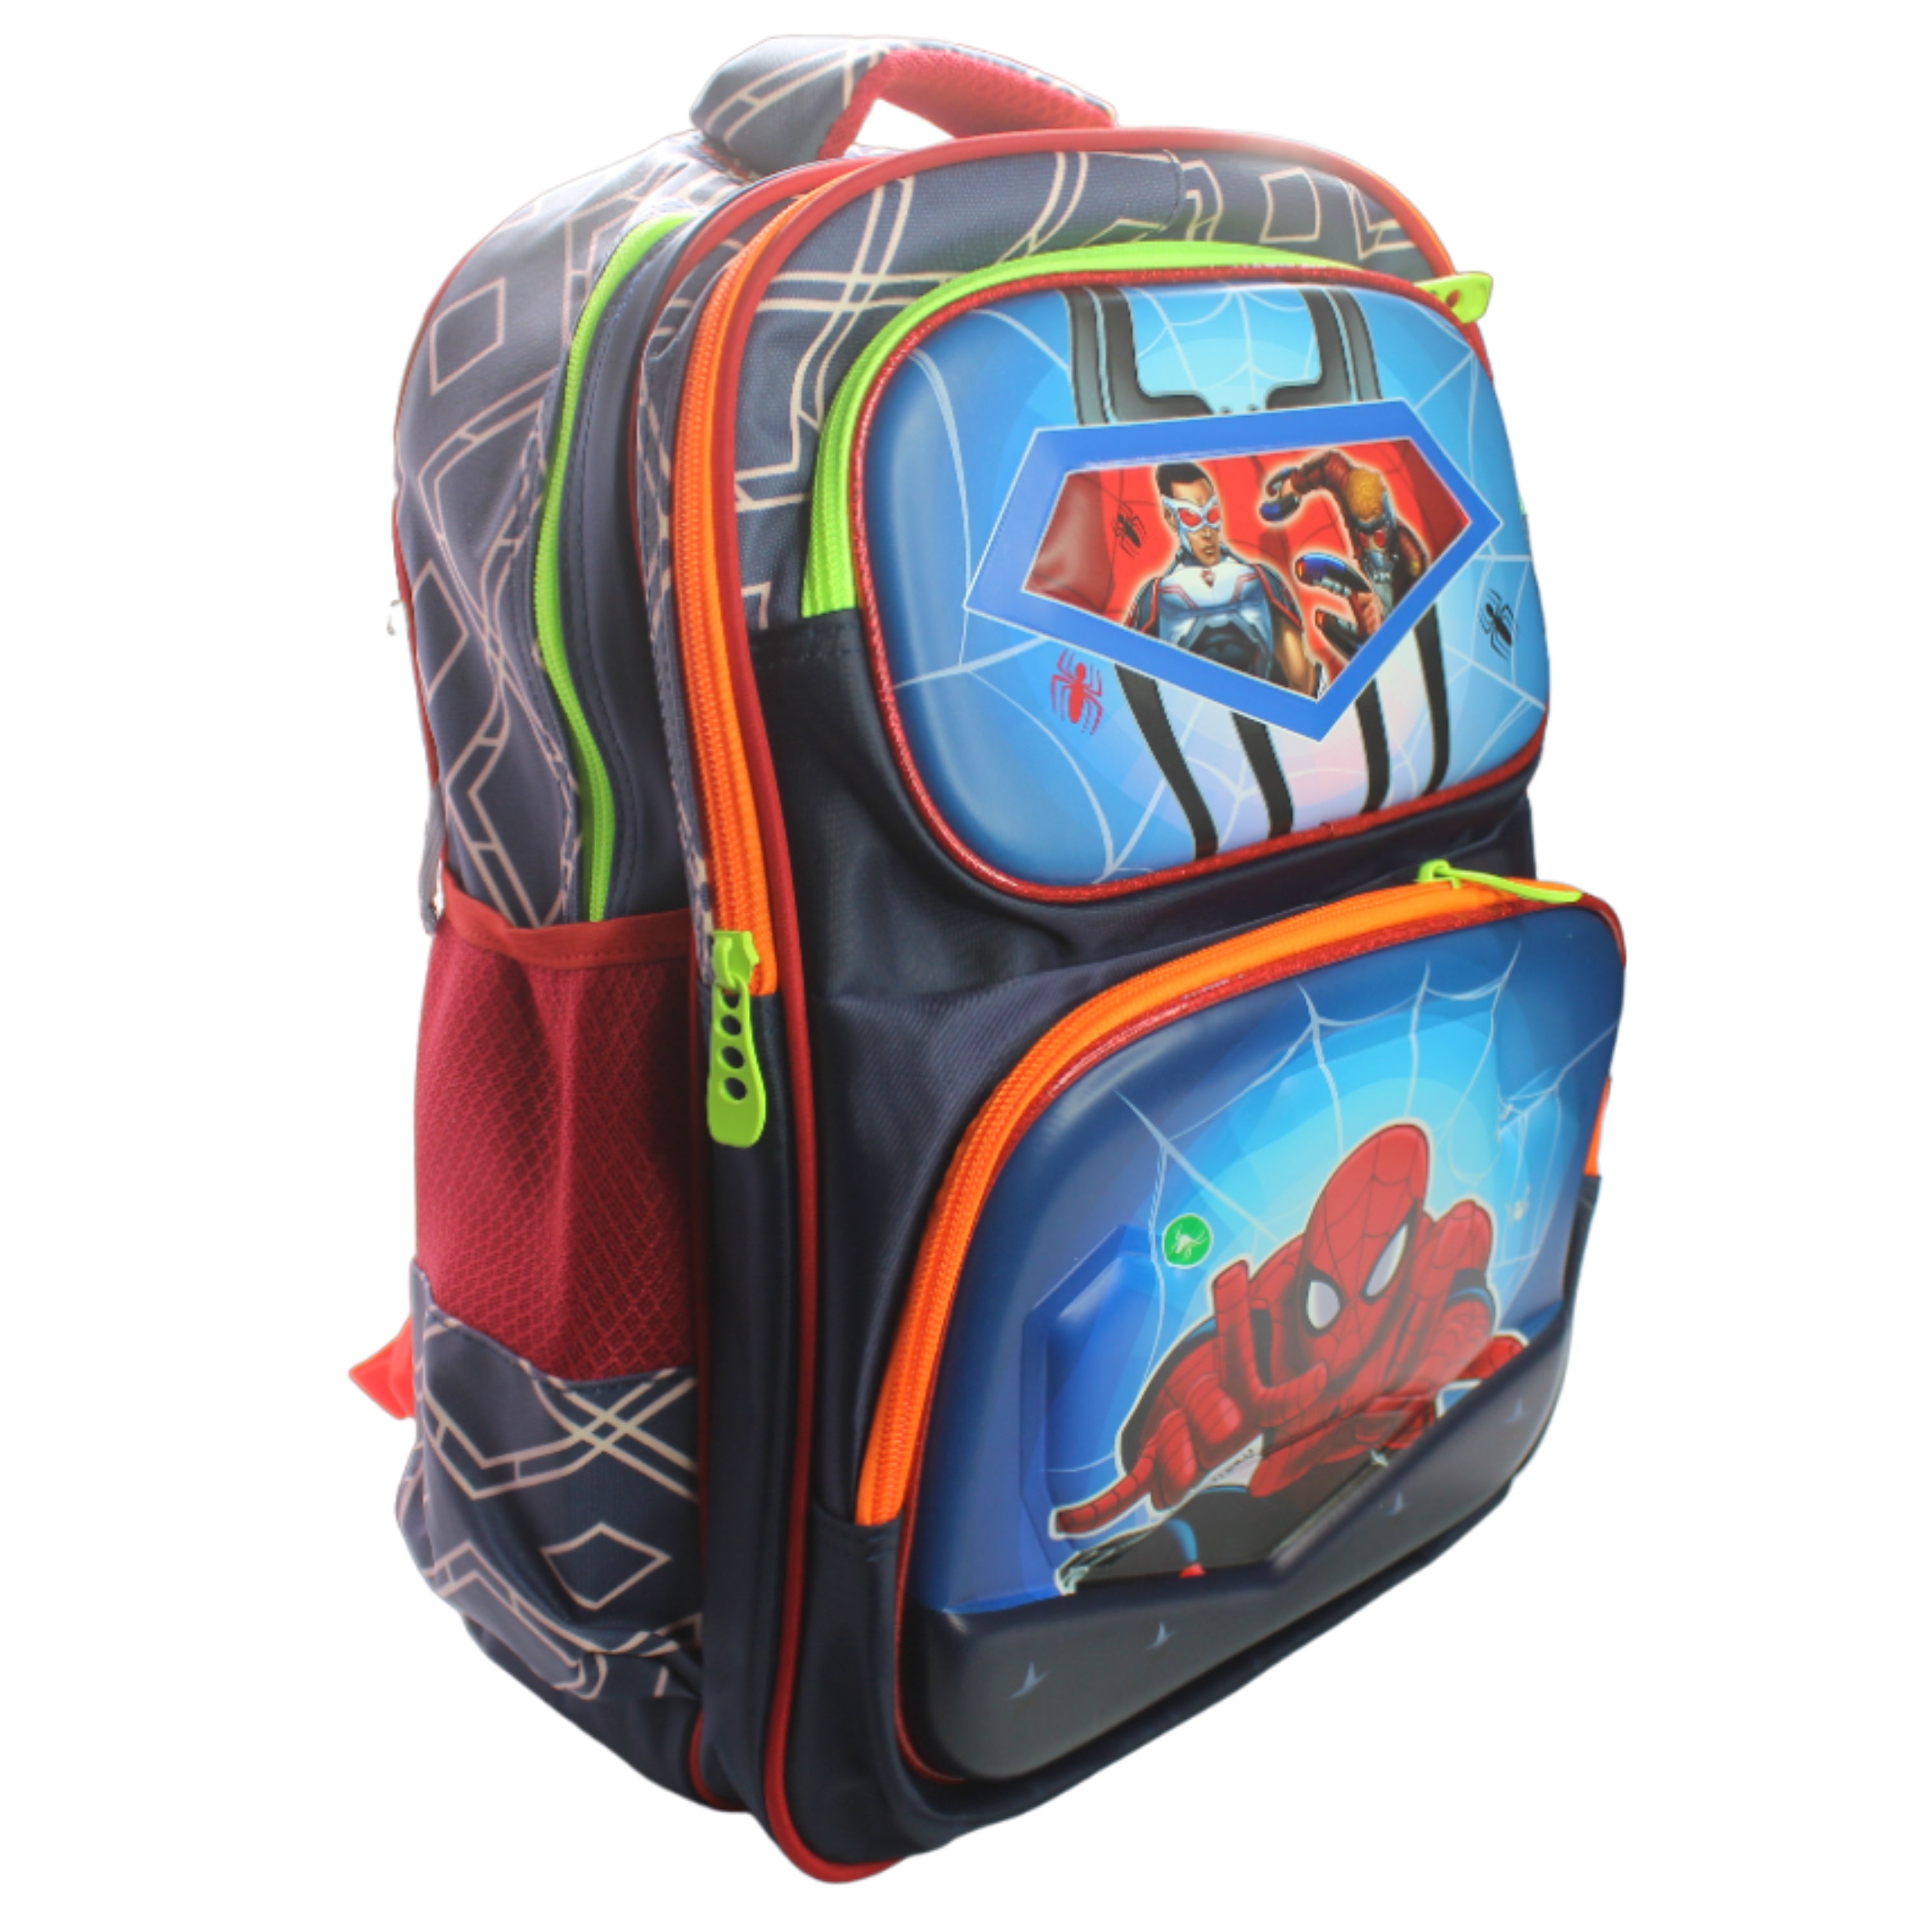 Spiderman School Bag for Kids Class 4 to 8